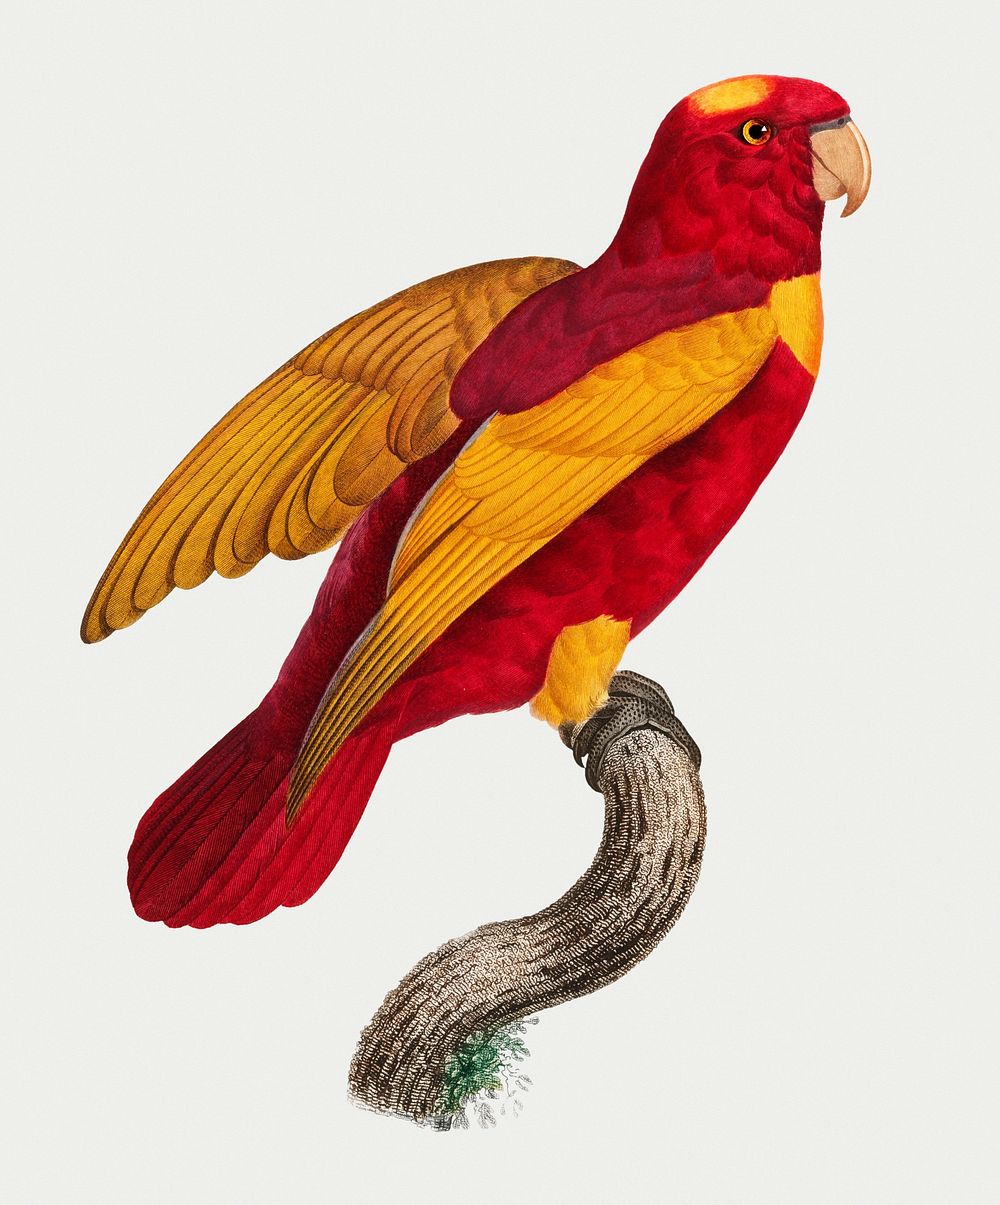 Red-and-Gold Lory (Lorius rex) vintage illustration